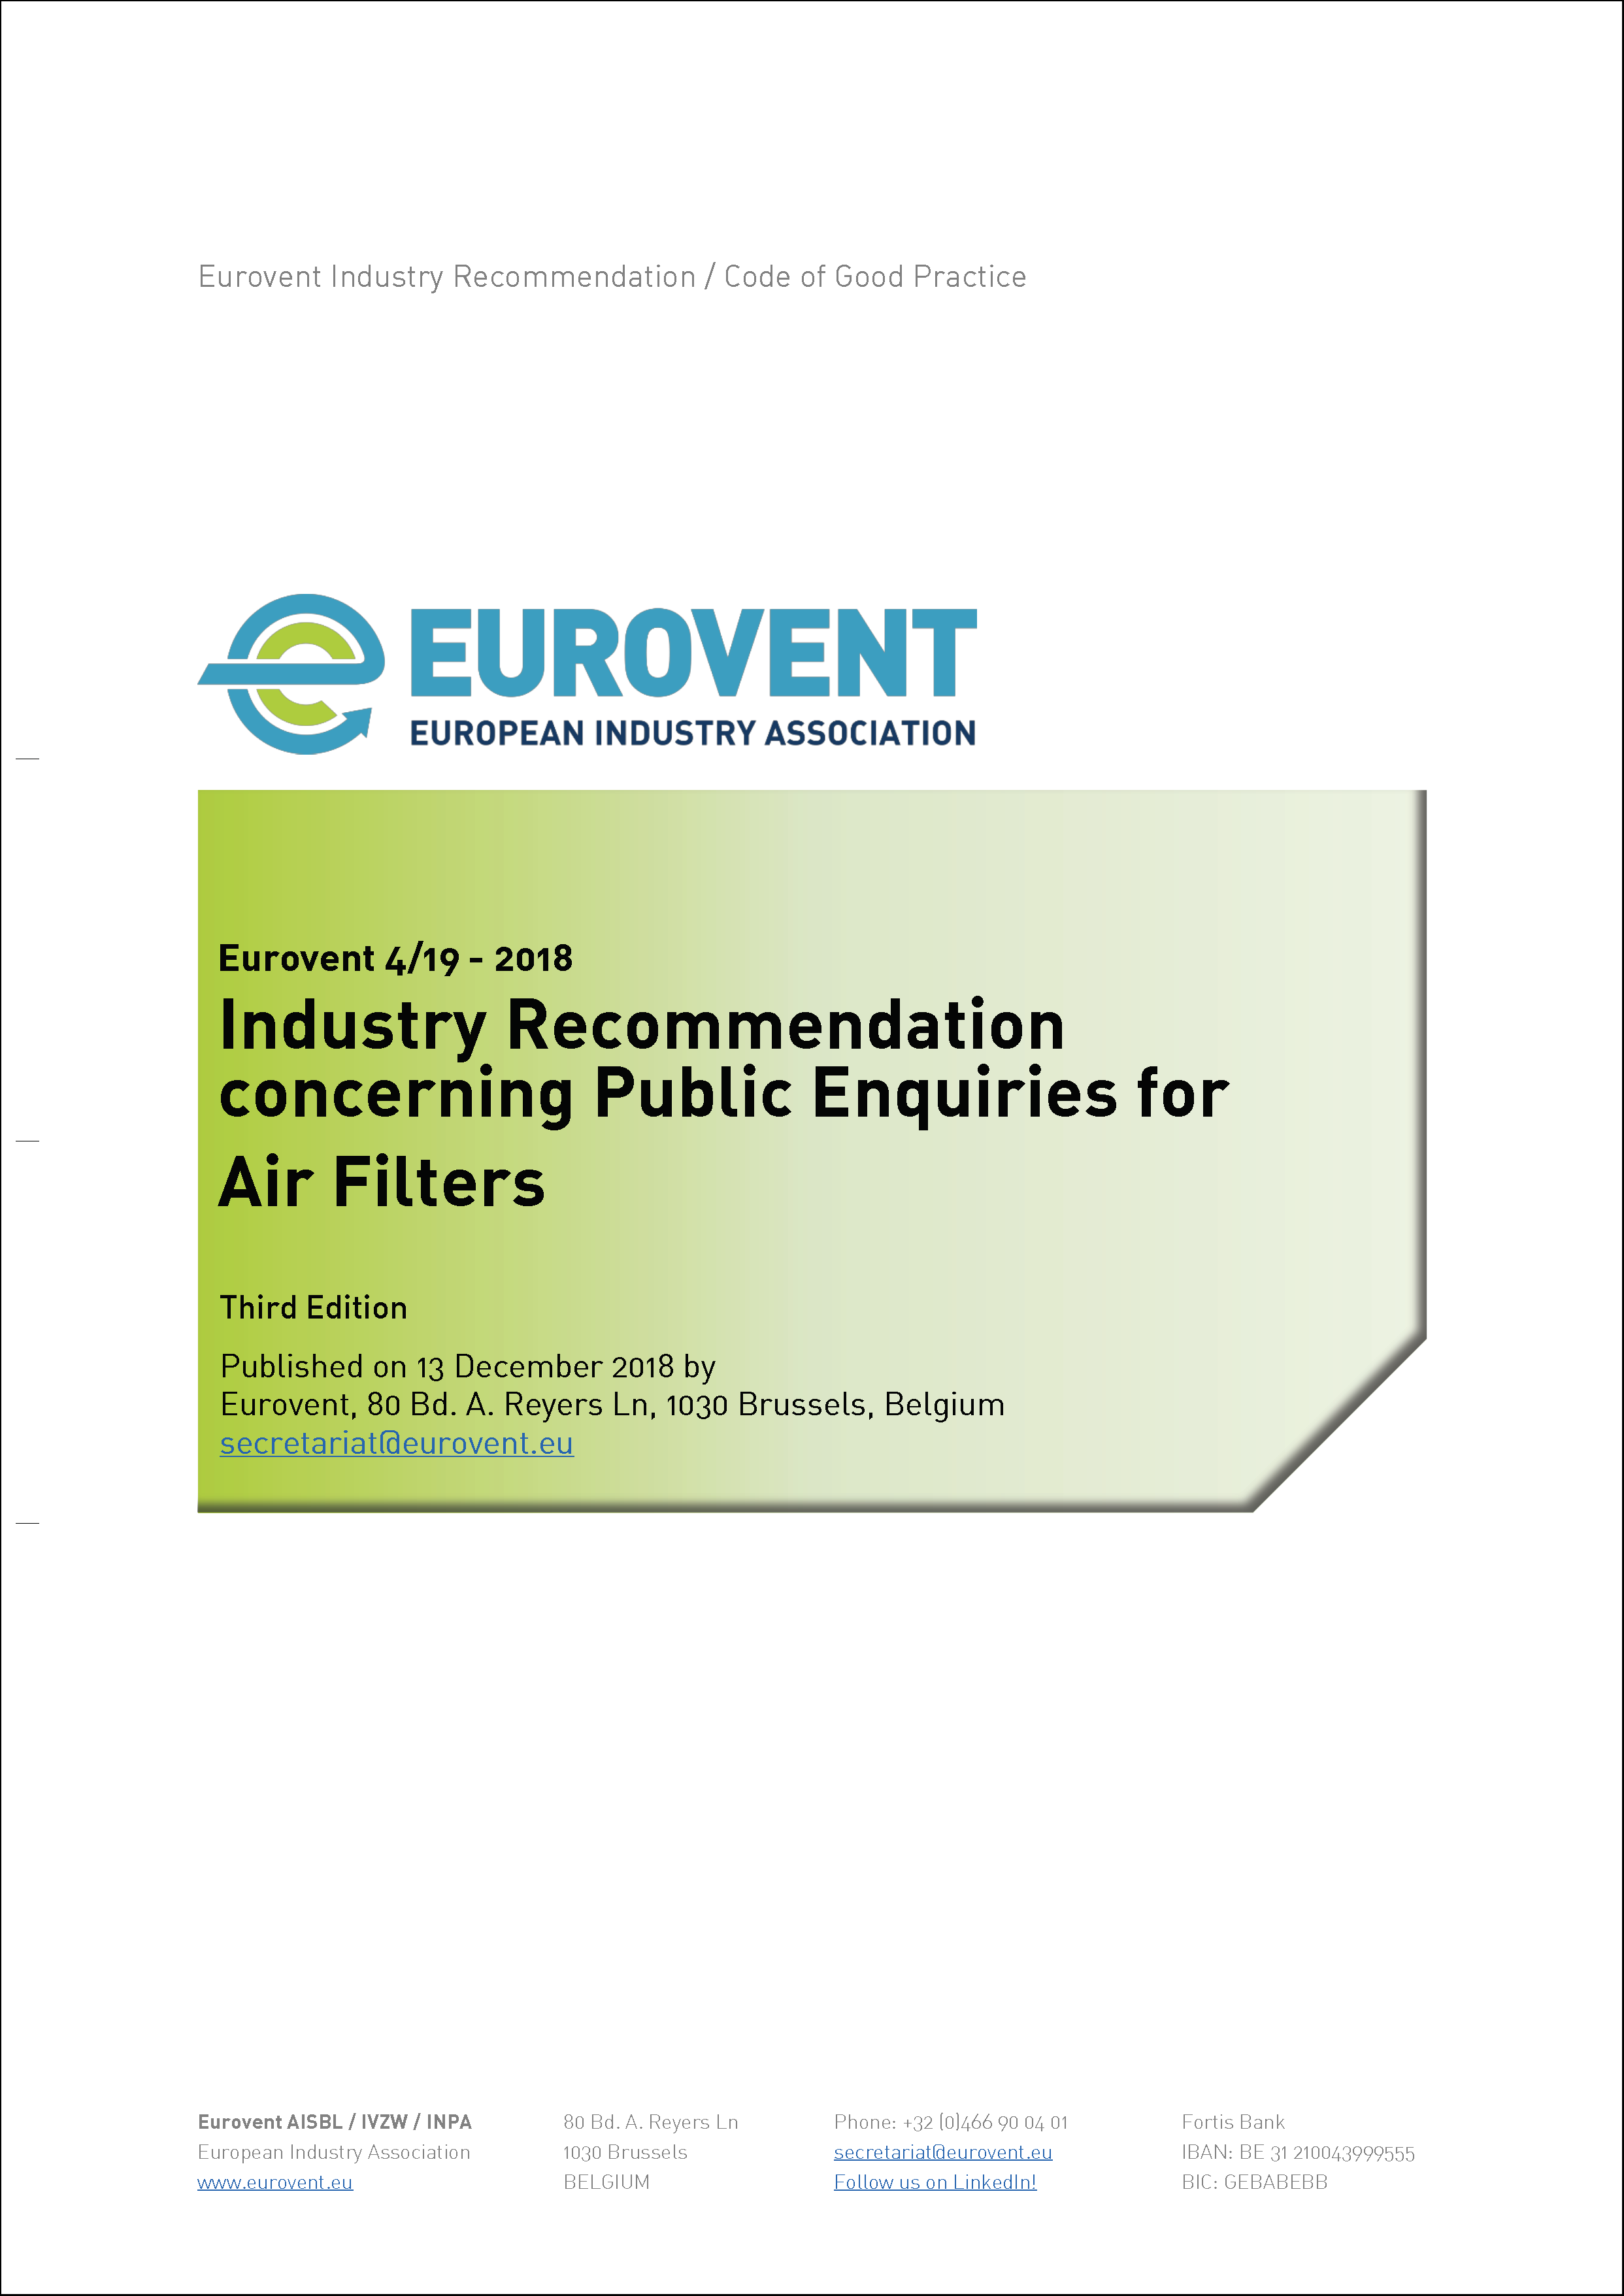 2018 - Eurovent 4/19 - 2018: Industry Recommendation concerning Public Enquiries for Air Filters